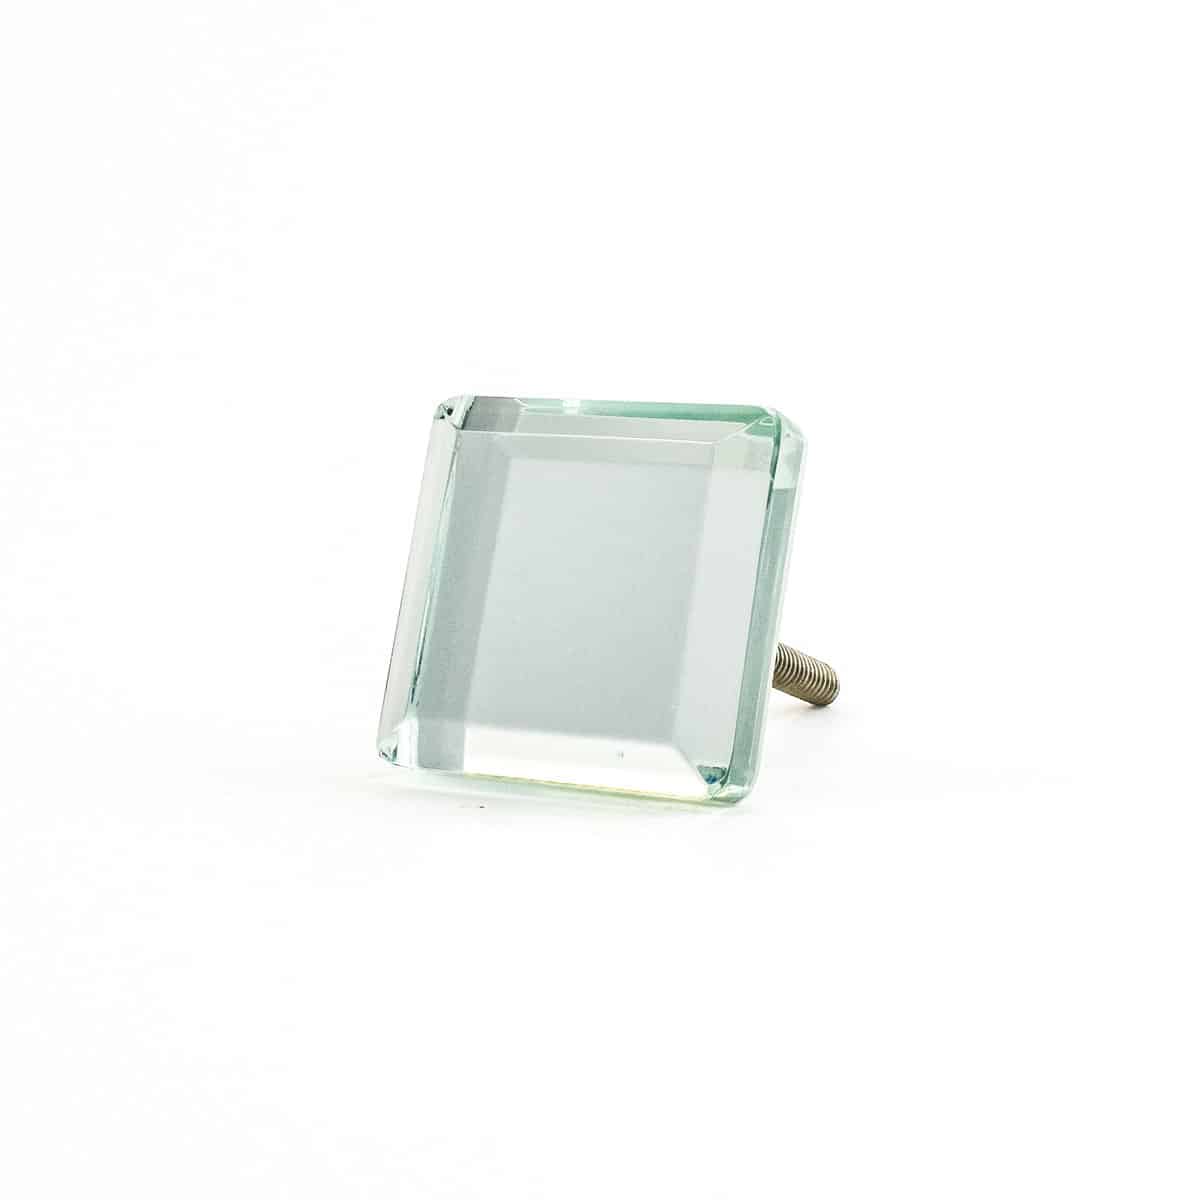 Mirrored Square Glass Knob For, Mirrored Cabinet Knobs